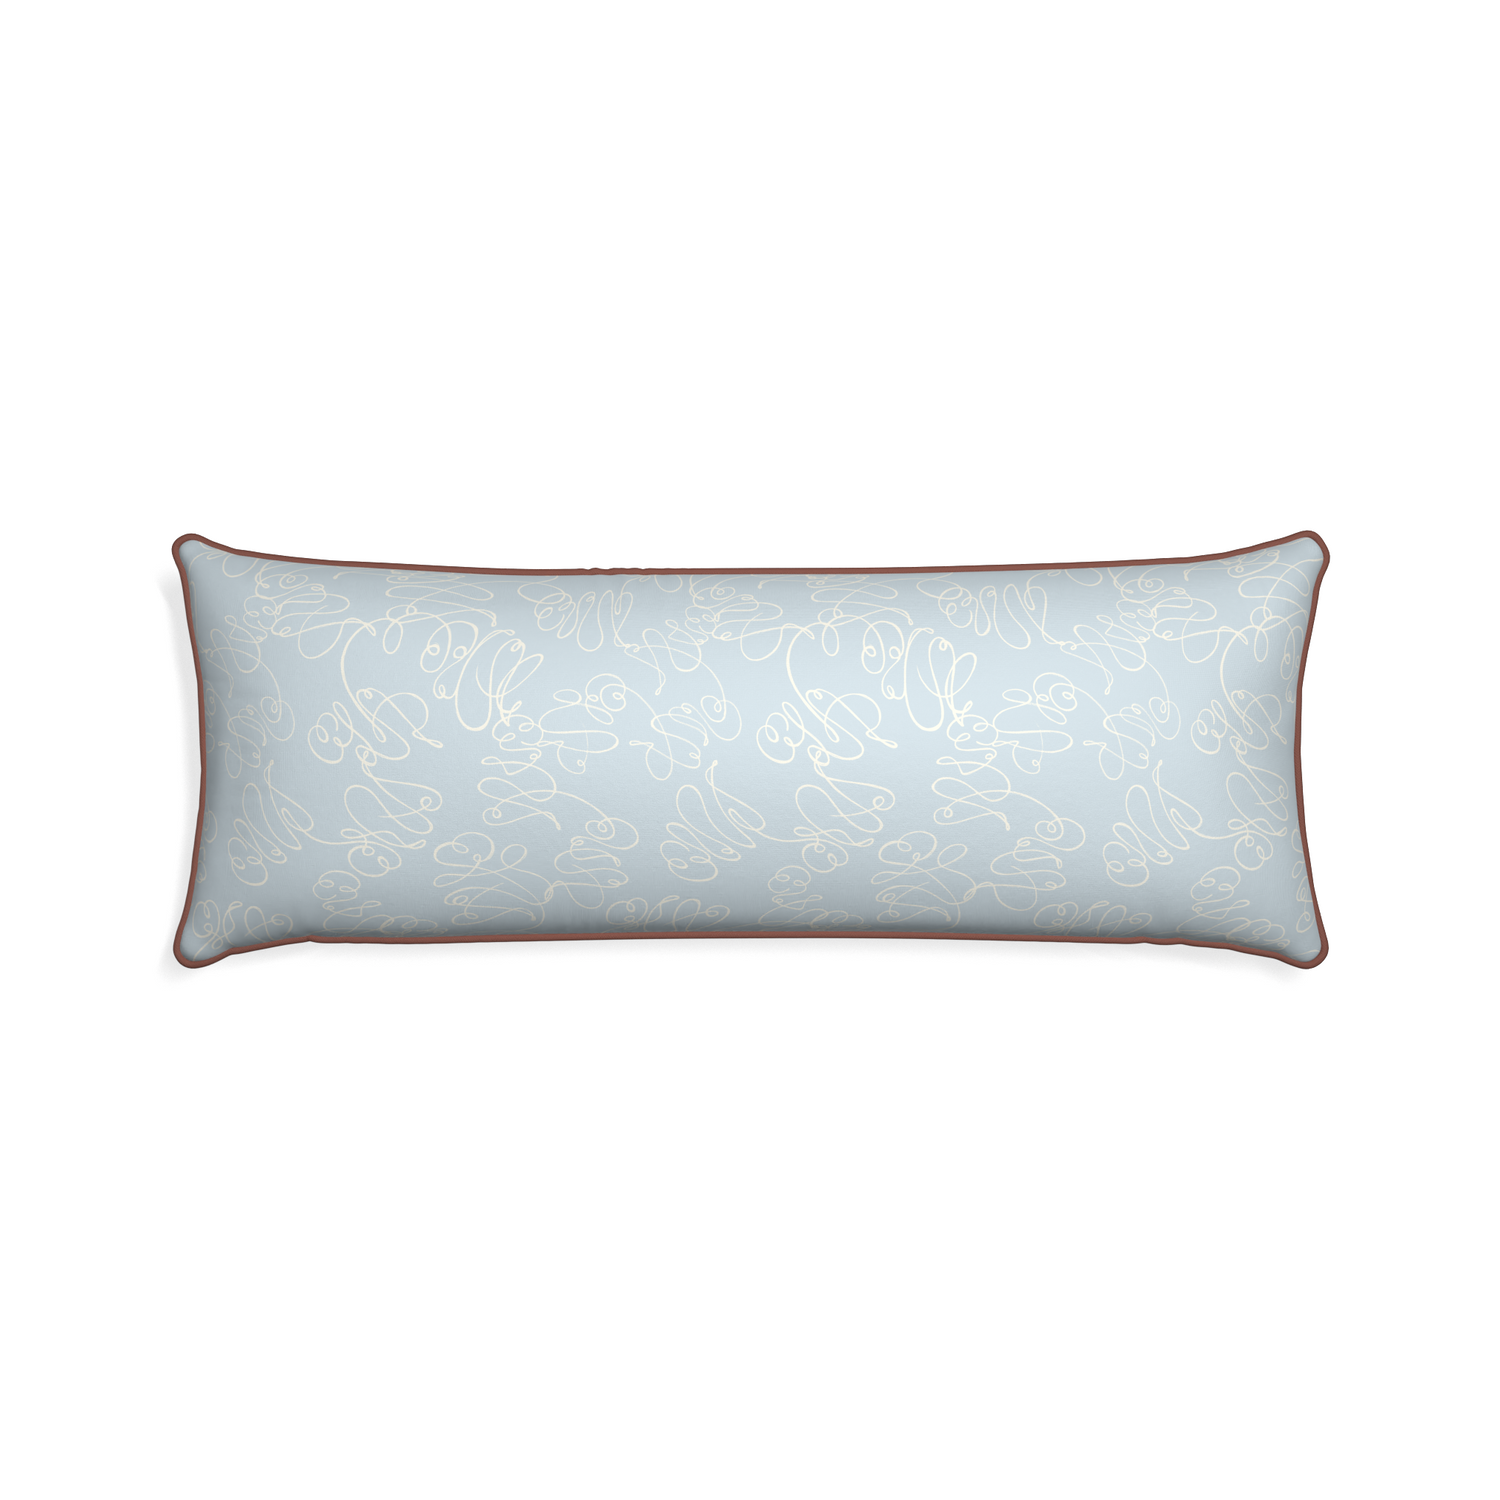 Xl-lumbar mirabella custom powder blue abstractpillow with w piping on white background